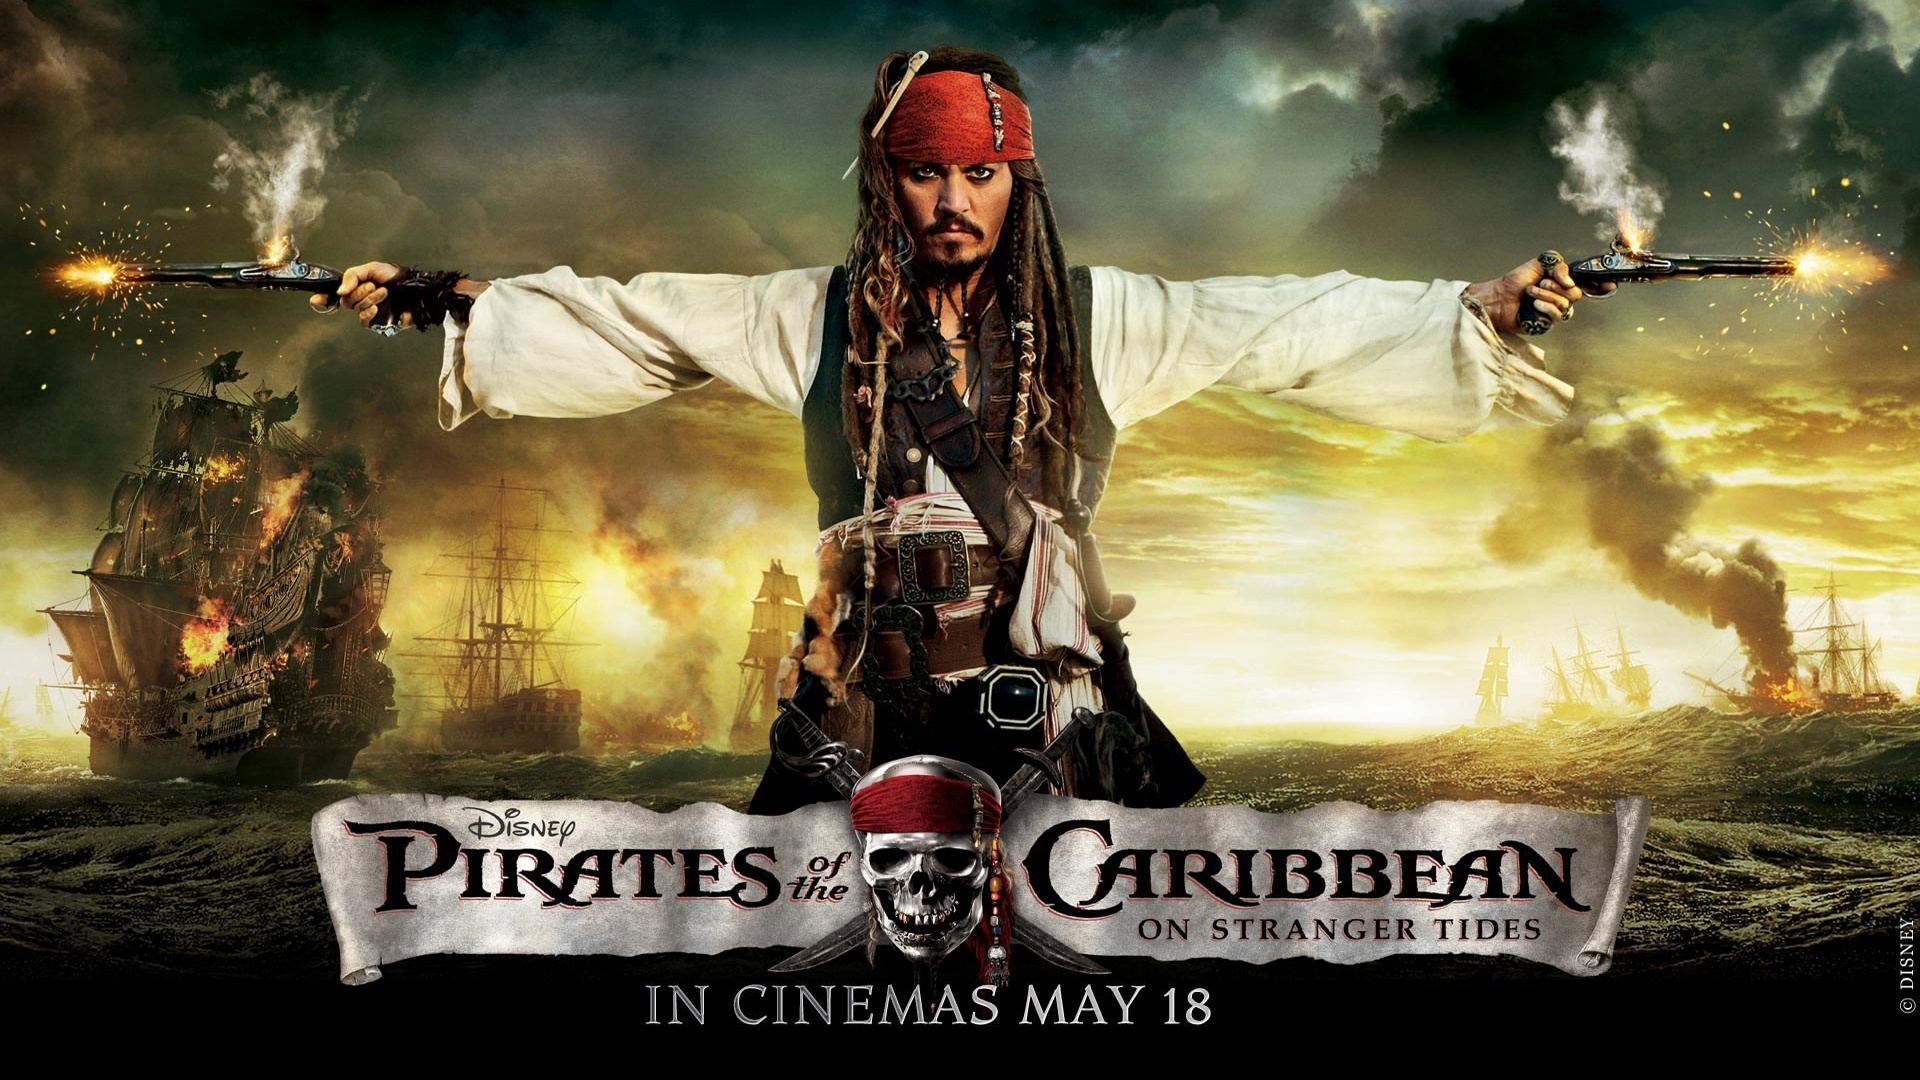 Pirates of the Caribbean 4 Poster for 1920 x 1080 HDTV 1080p resolution